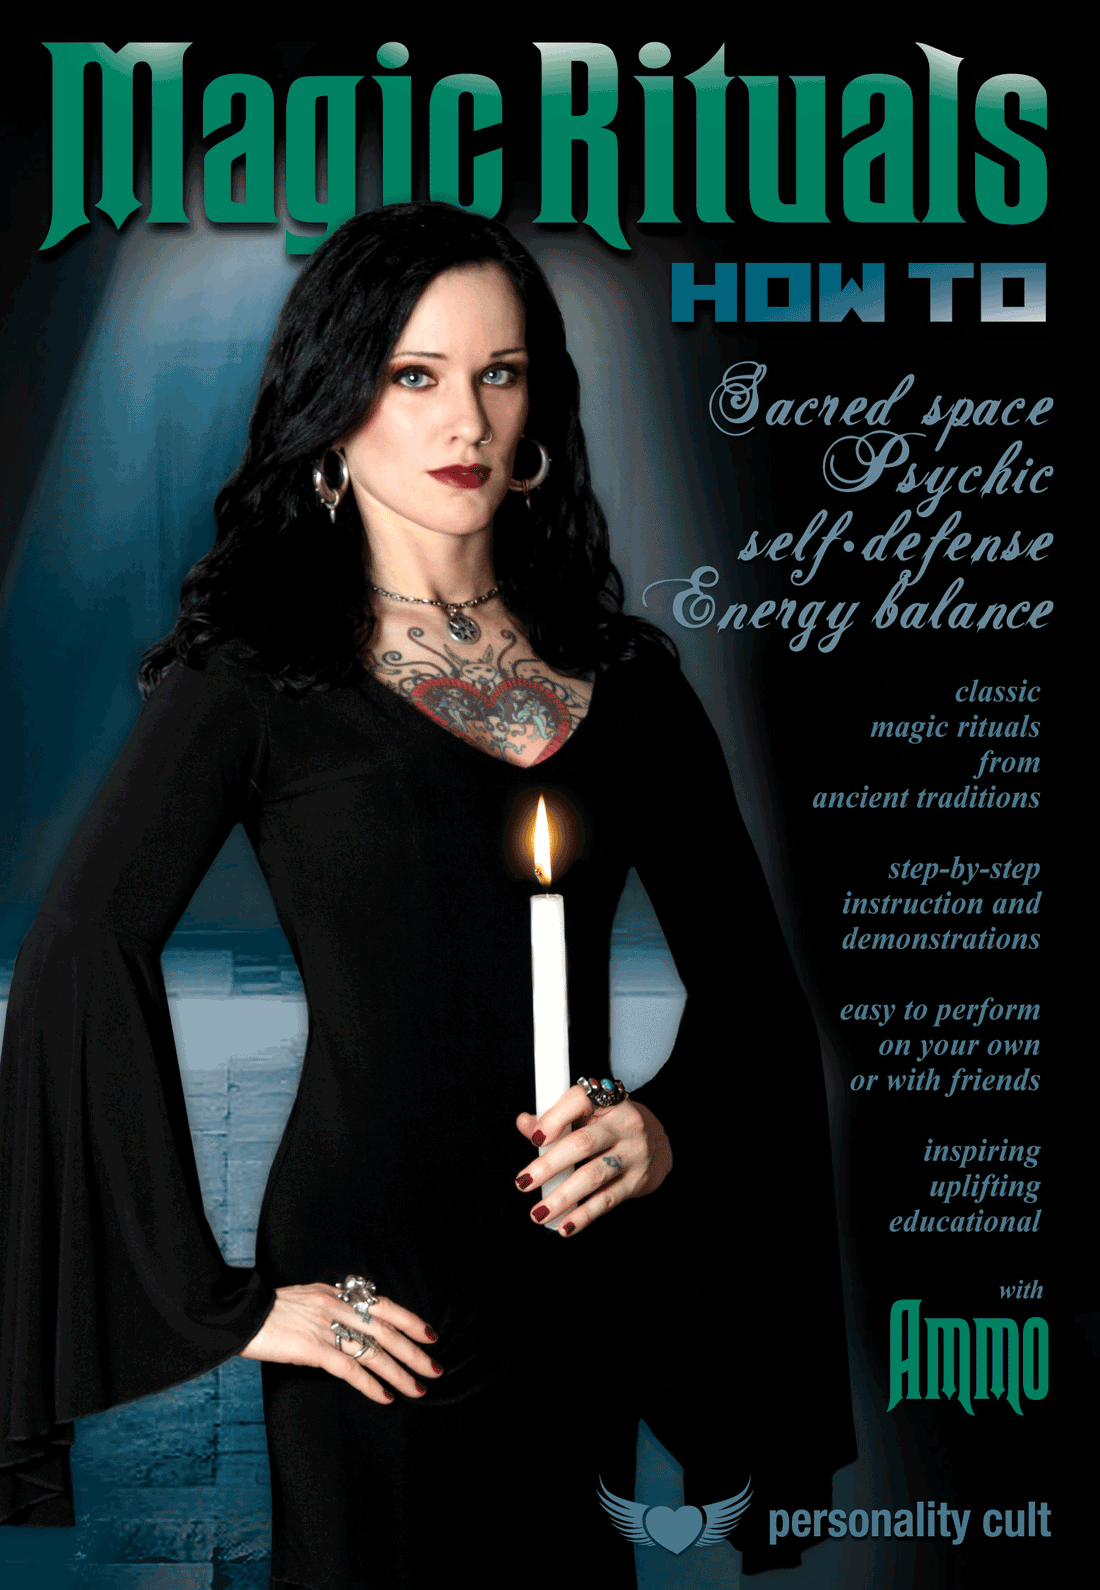 Magic Rituals How-To: Sacred Space, Energy, Psychic Self-Defense  - INSTANT VIDEO / DVD - World Dance New York